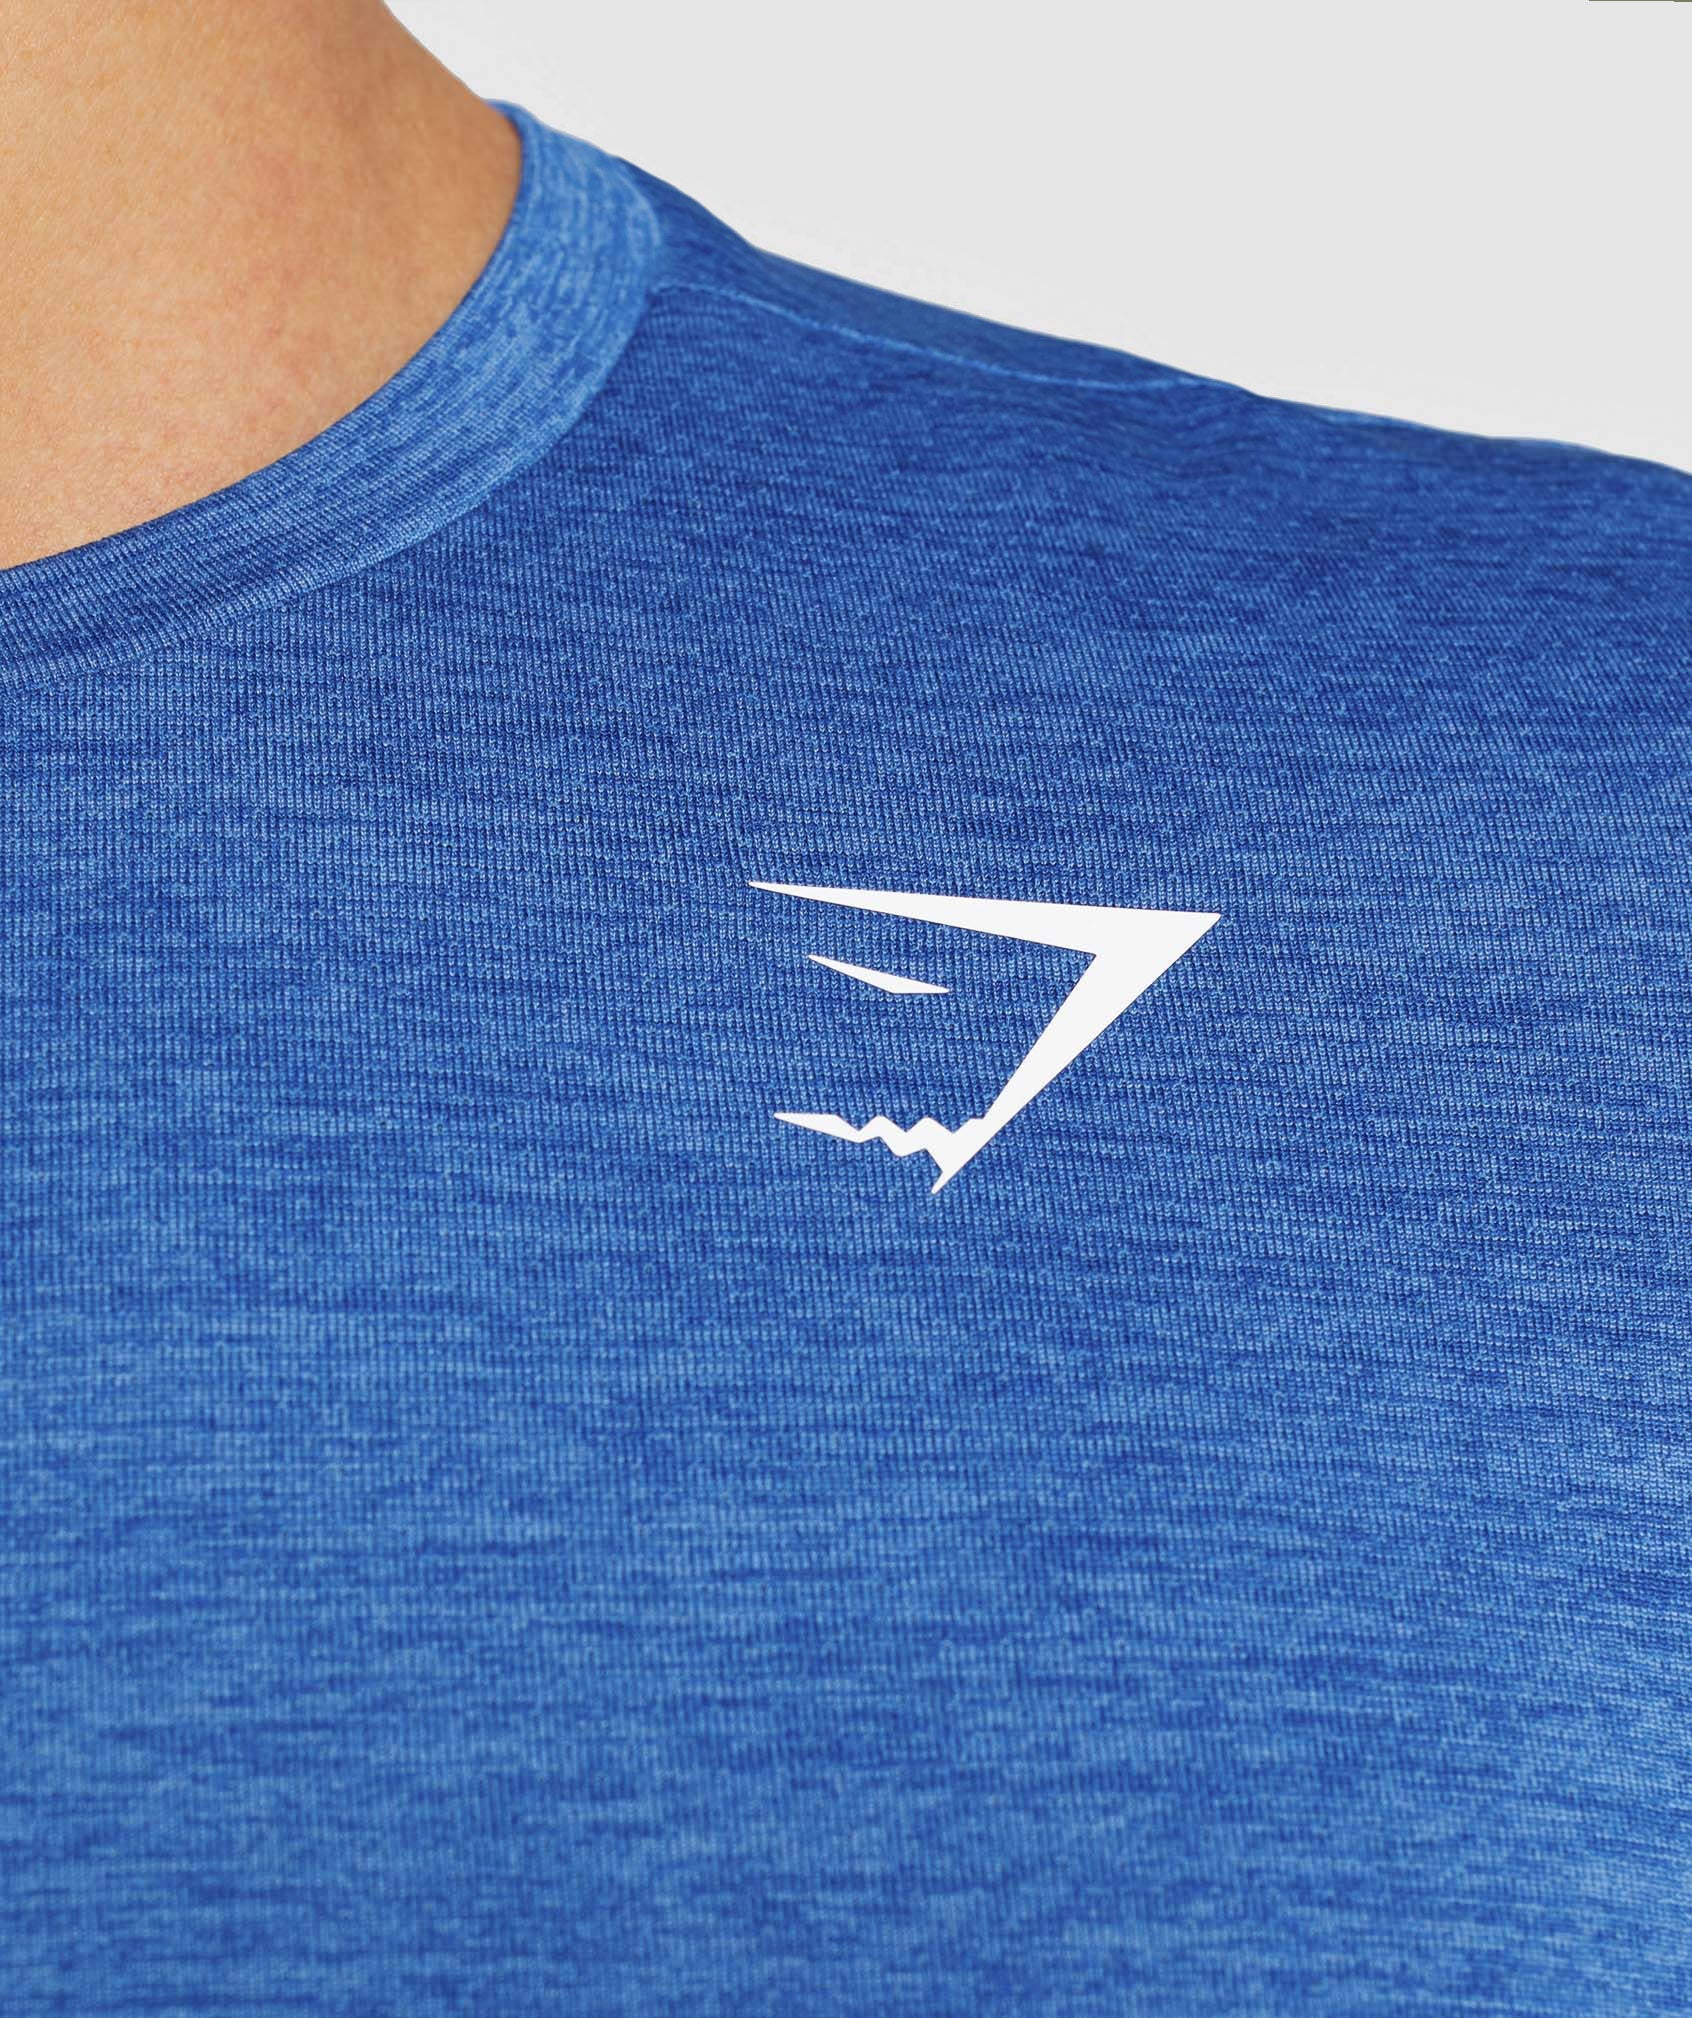 Arrival Marl T-Shirt in Athletic Blue/Javelin Blue Marl - view 5